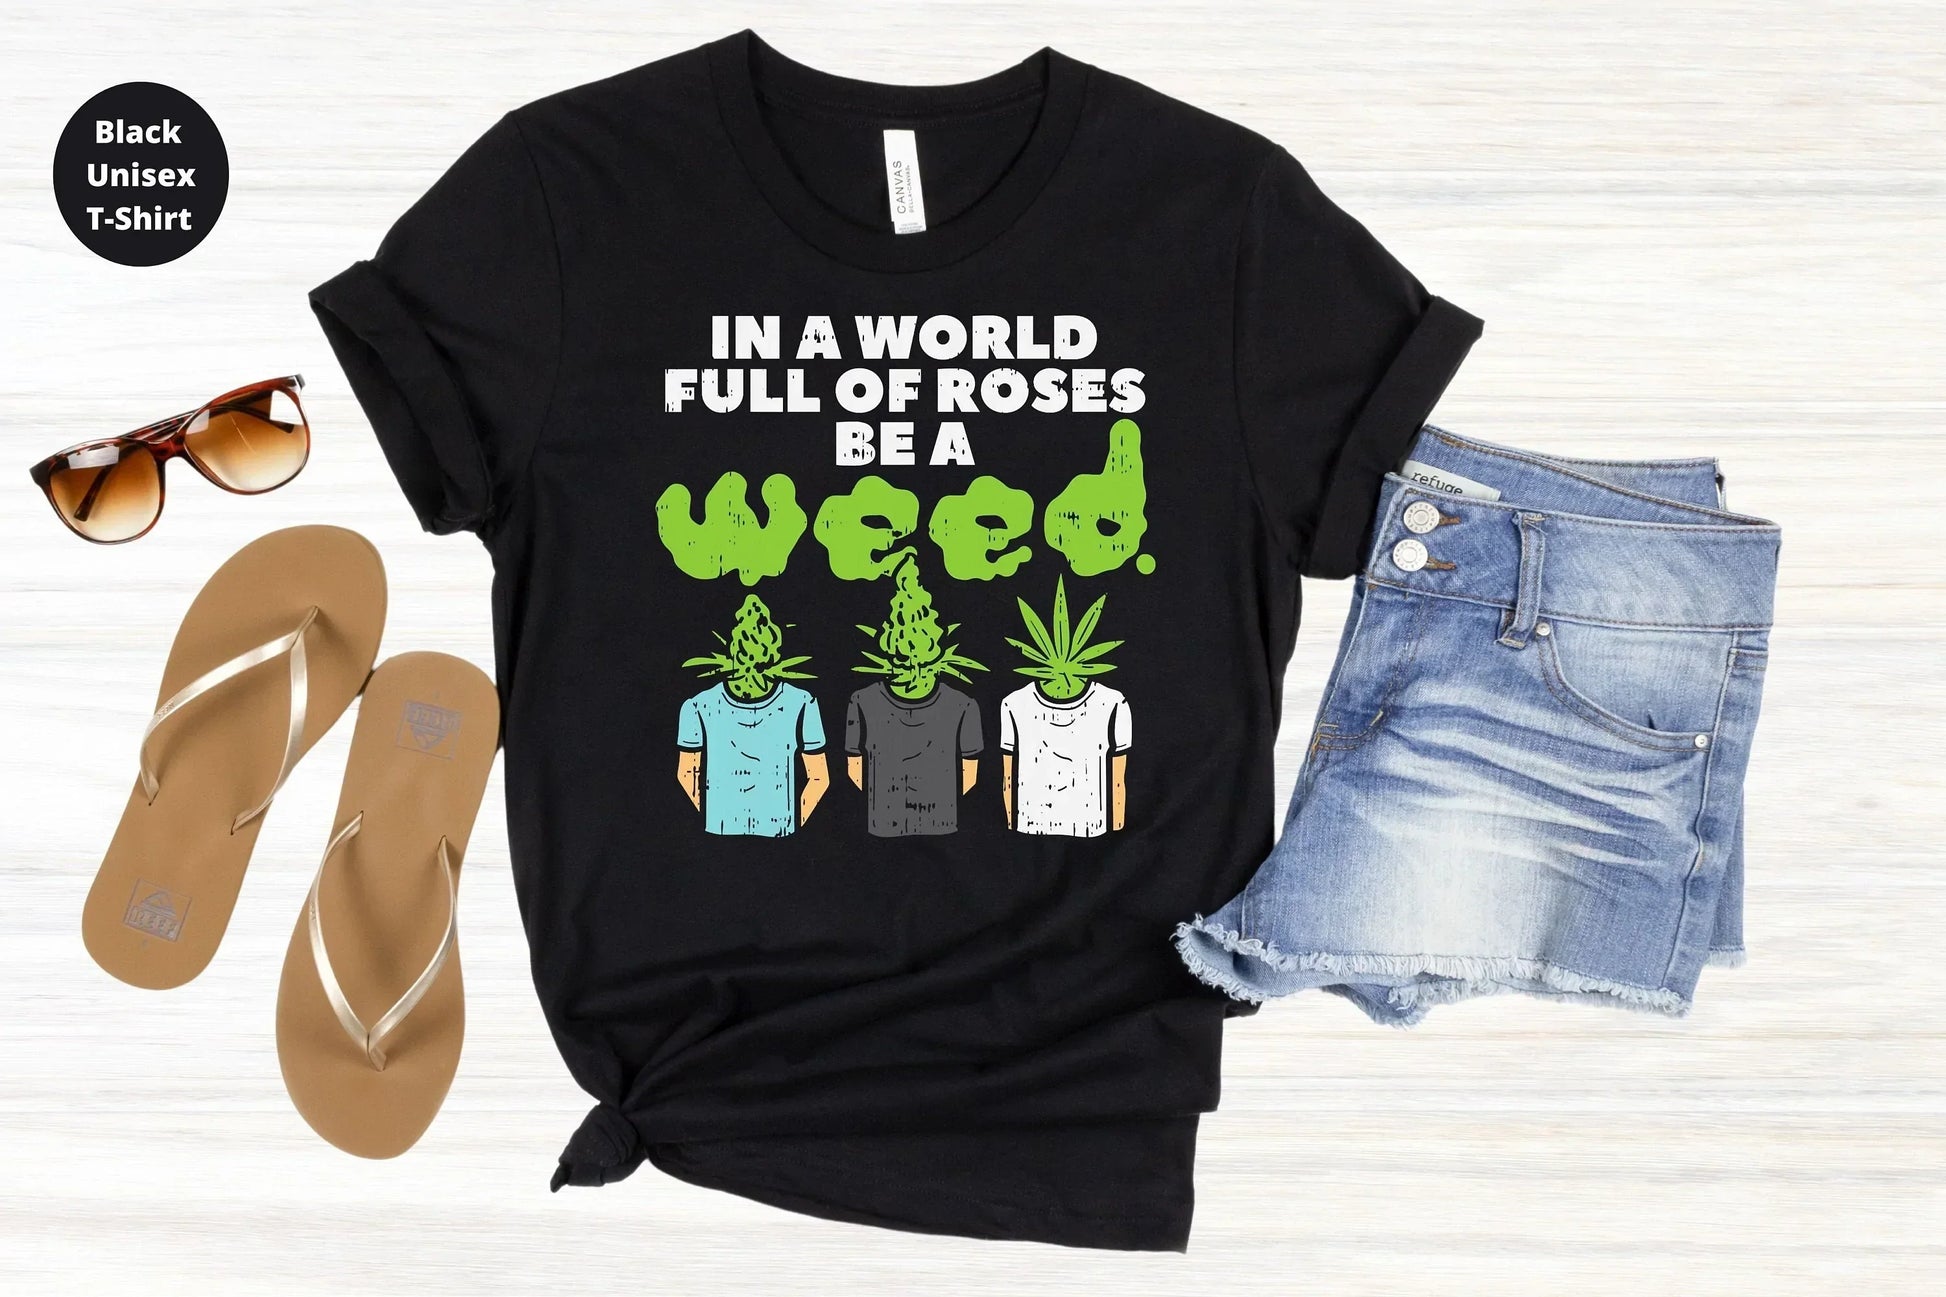 In a World full of Roses be a Weed, Funny Stoner Shirt HMDesignStudioUS